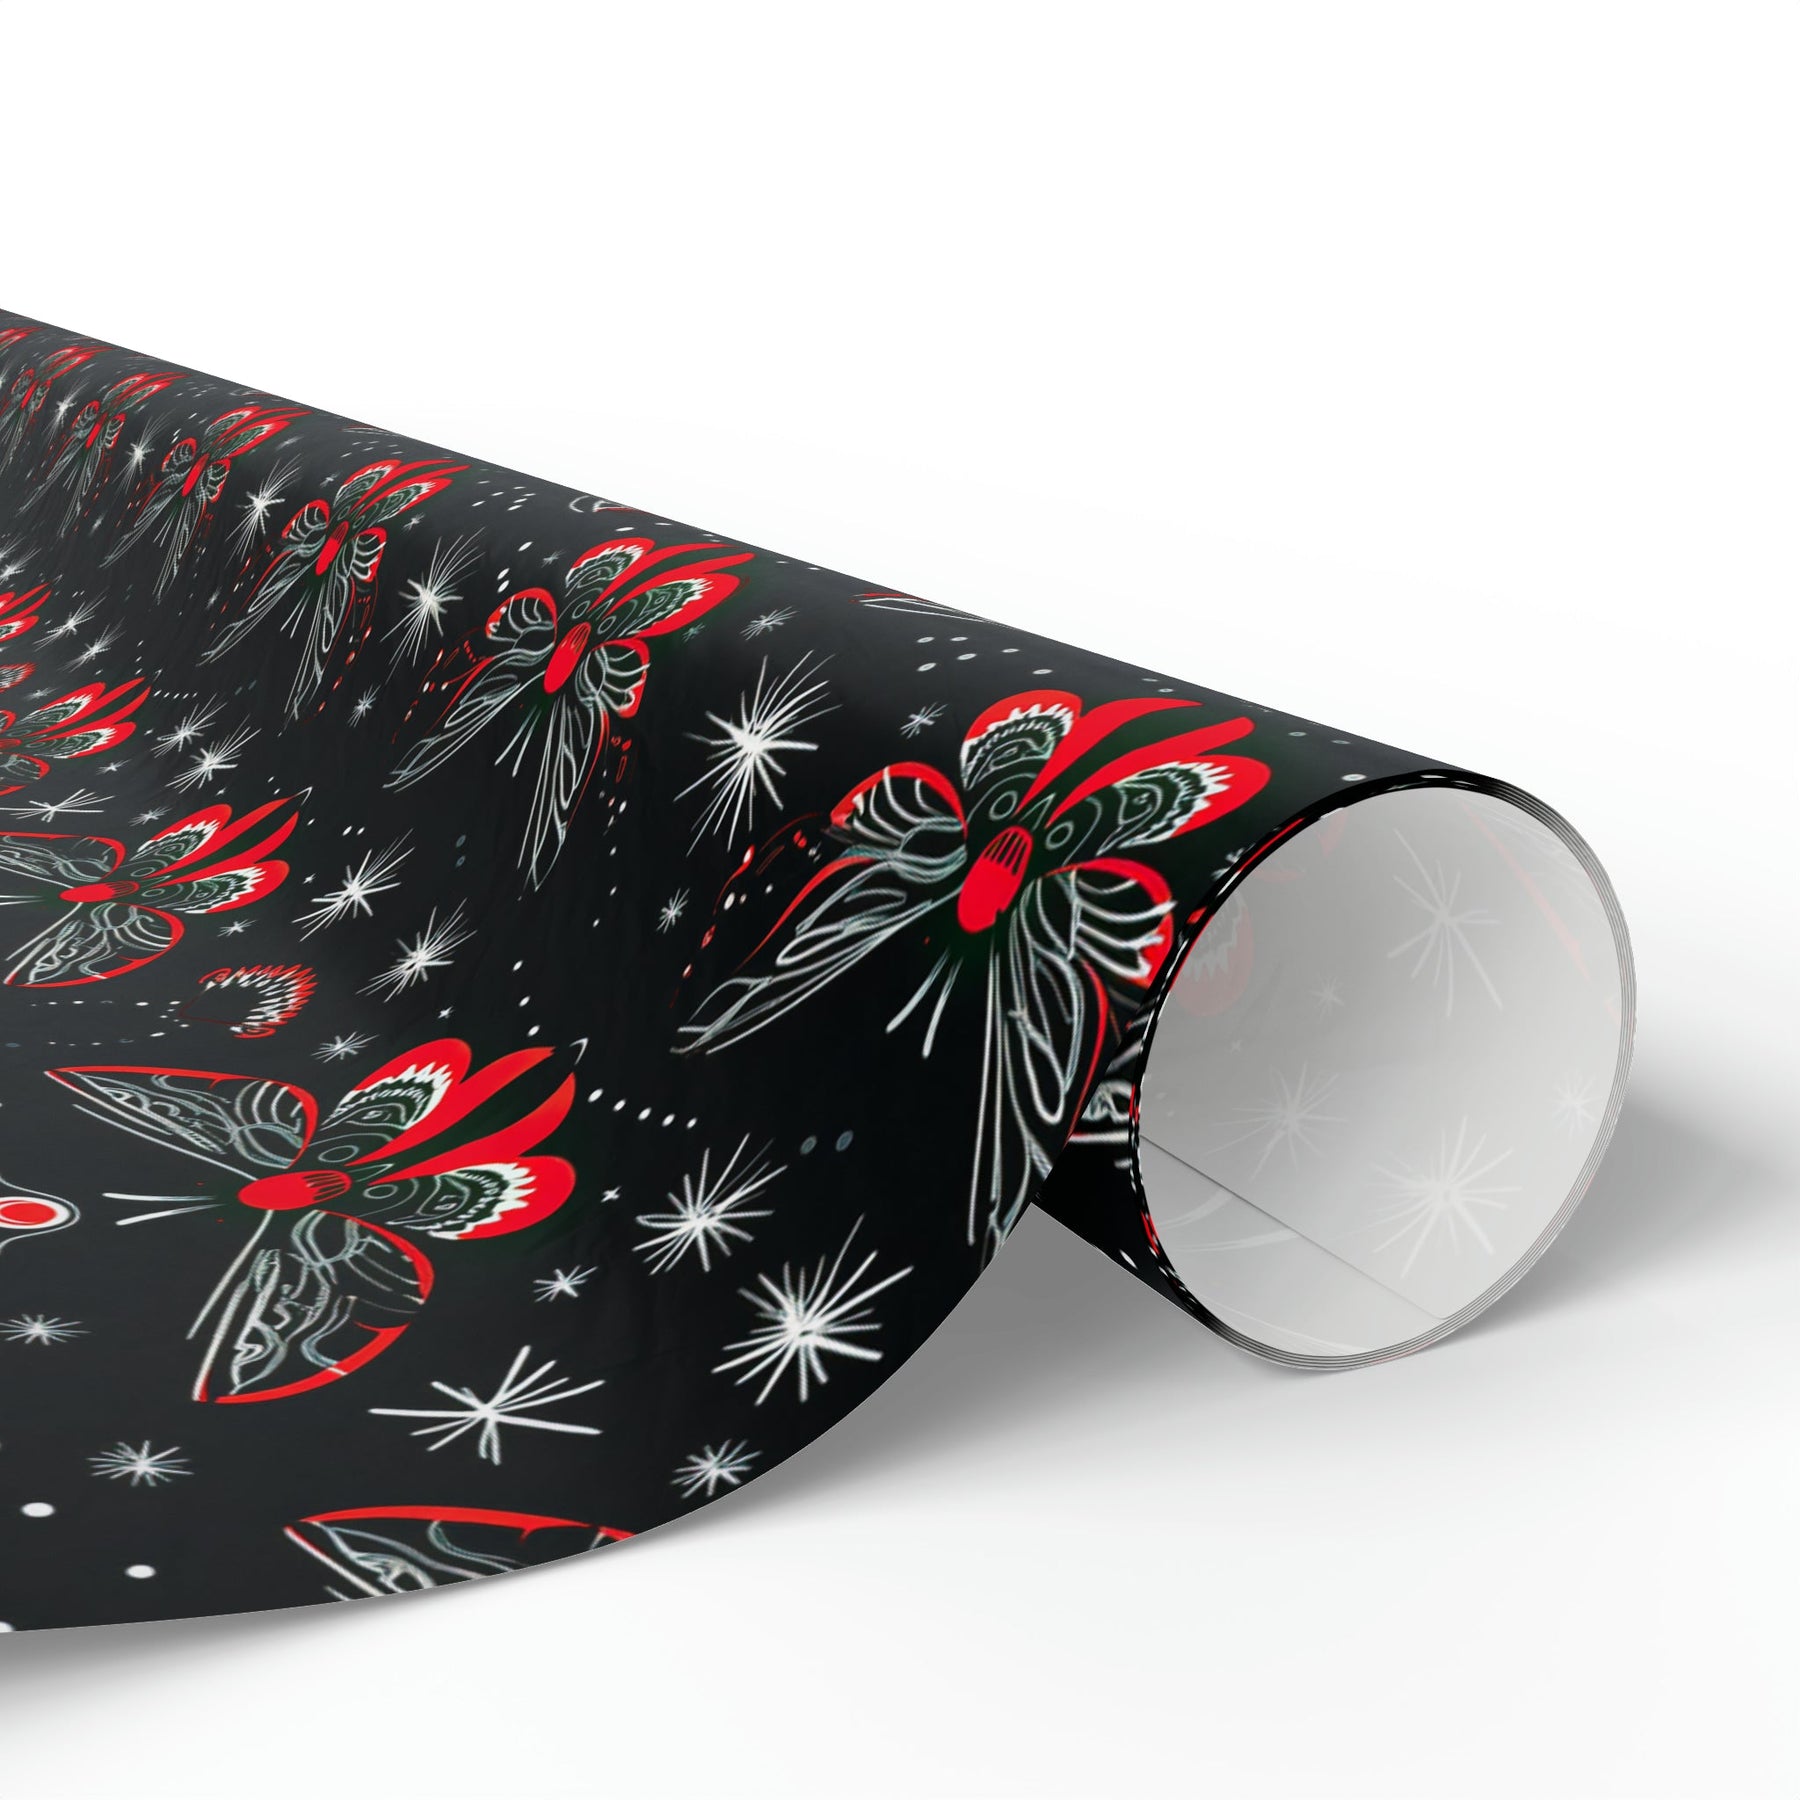 Black & Red Celestial Moth Wrapping Paper - Goth Cloth Co.Home Decor58416378539299506323